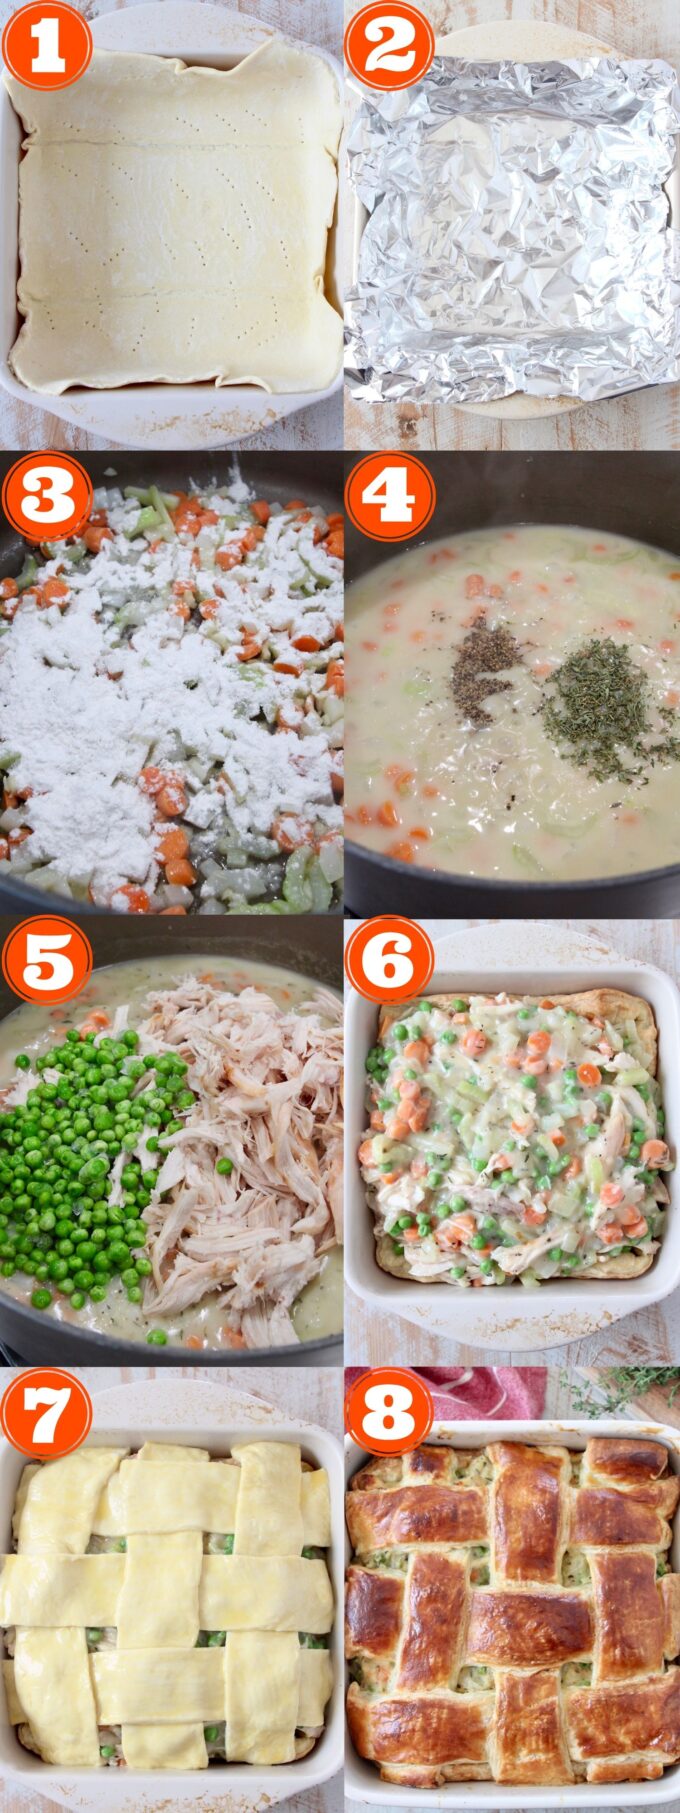 collage of images showing how to make chicken pot pie